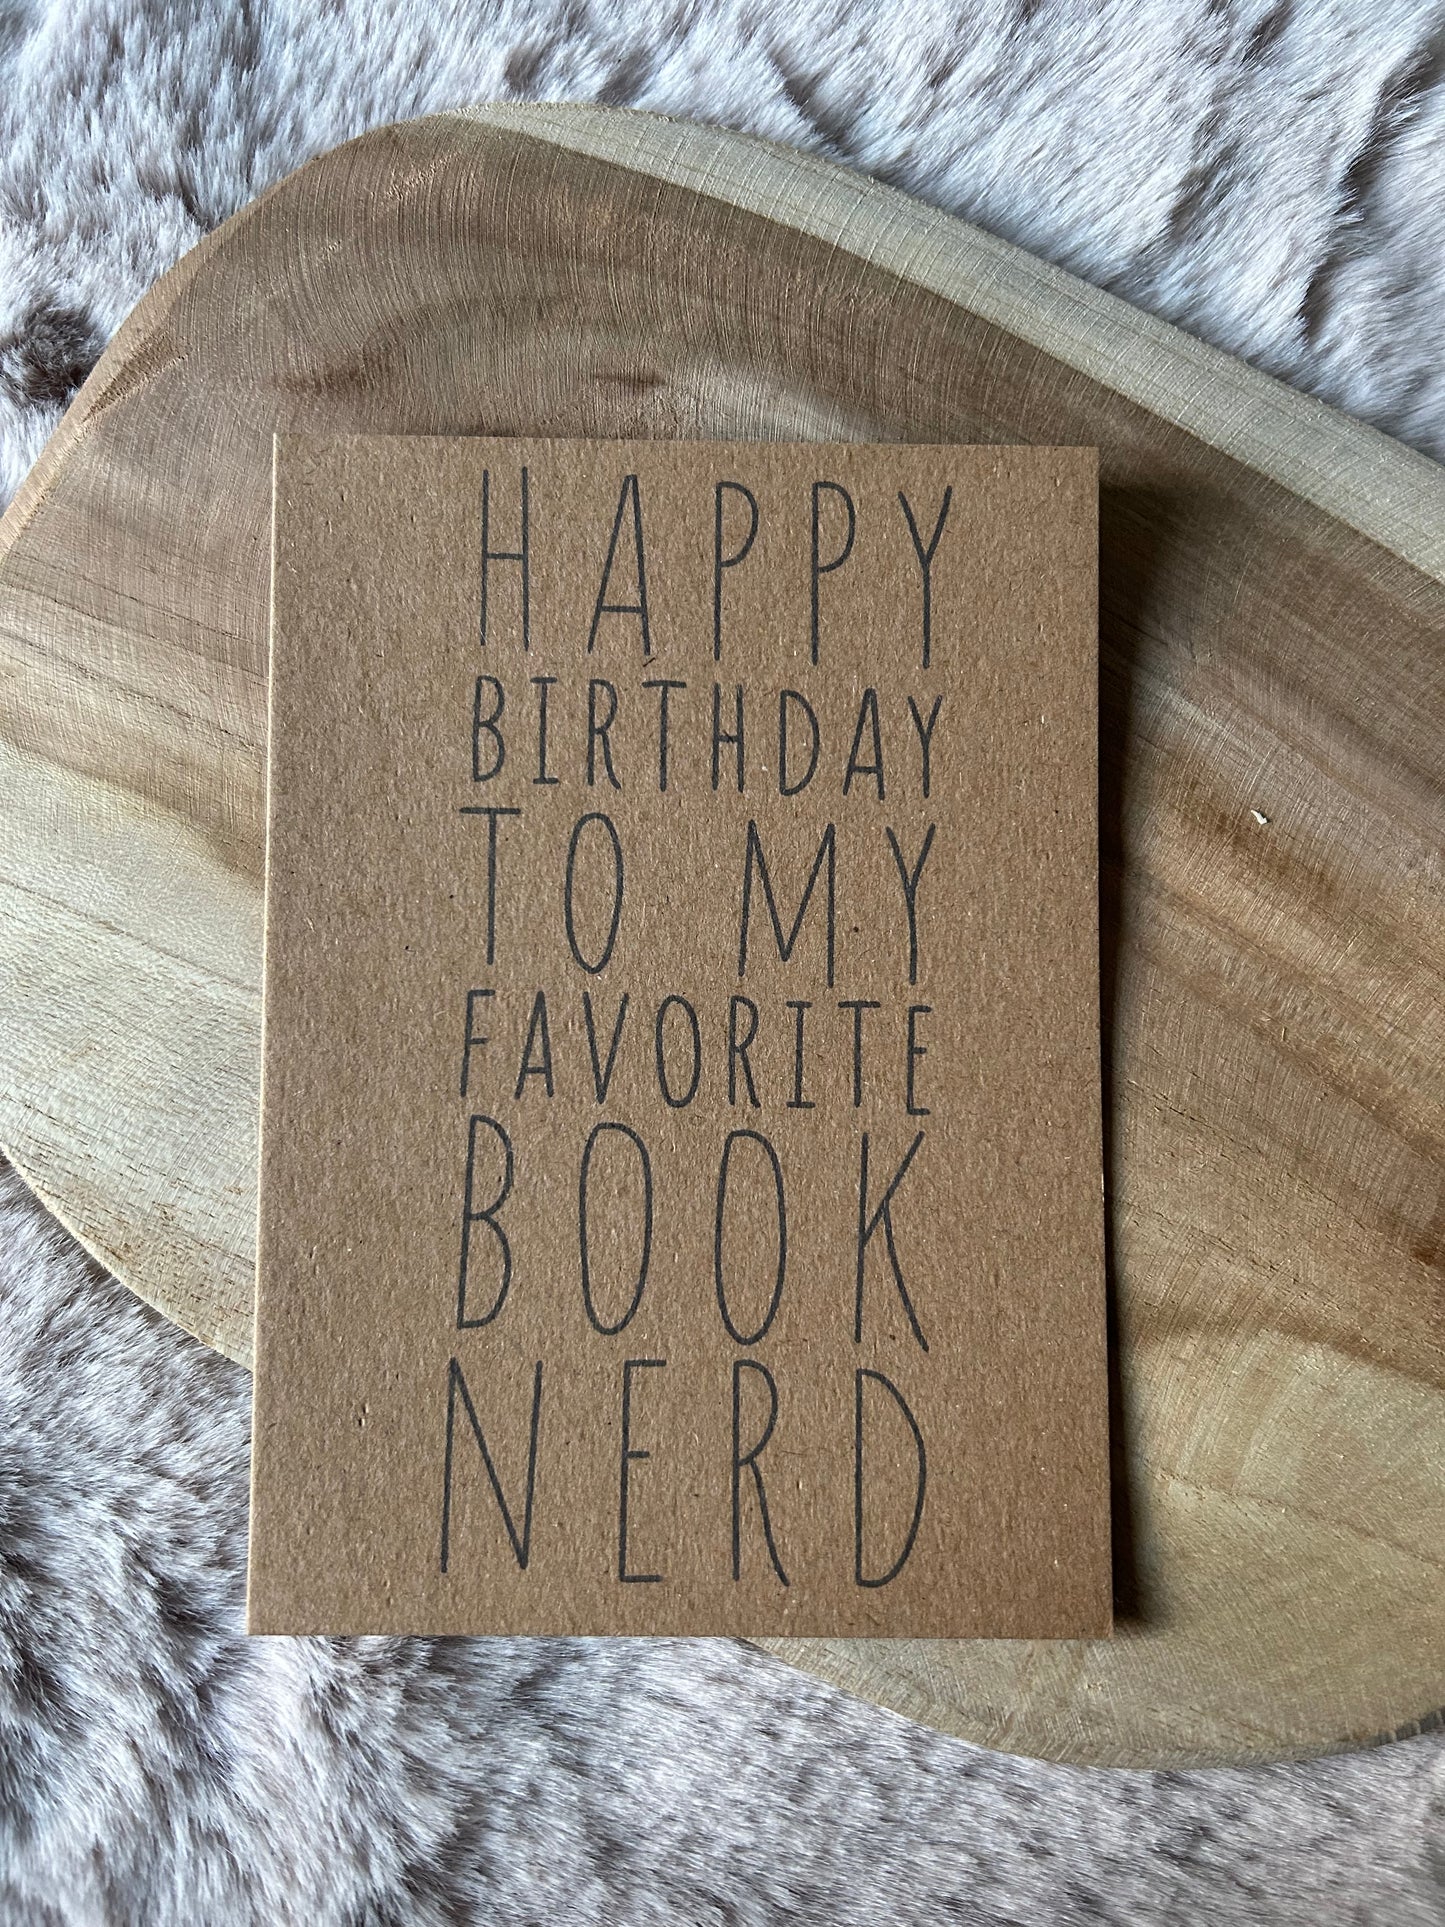 Happy Birthday to my favorite Book Nerd|| Quirky Greeting Card